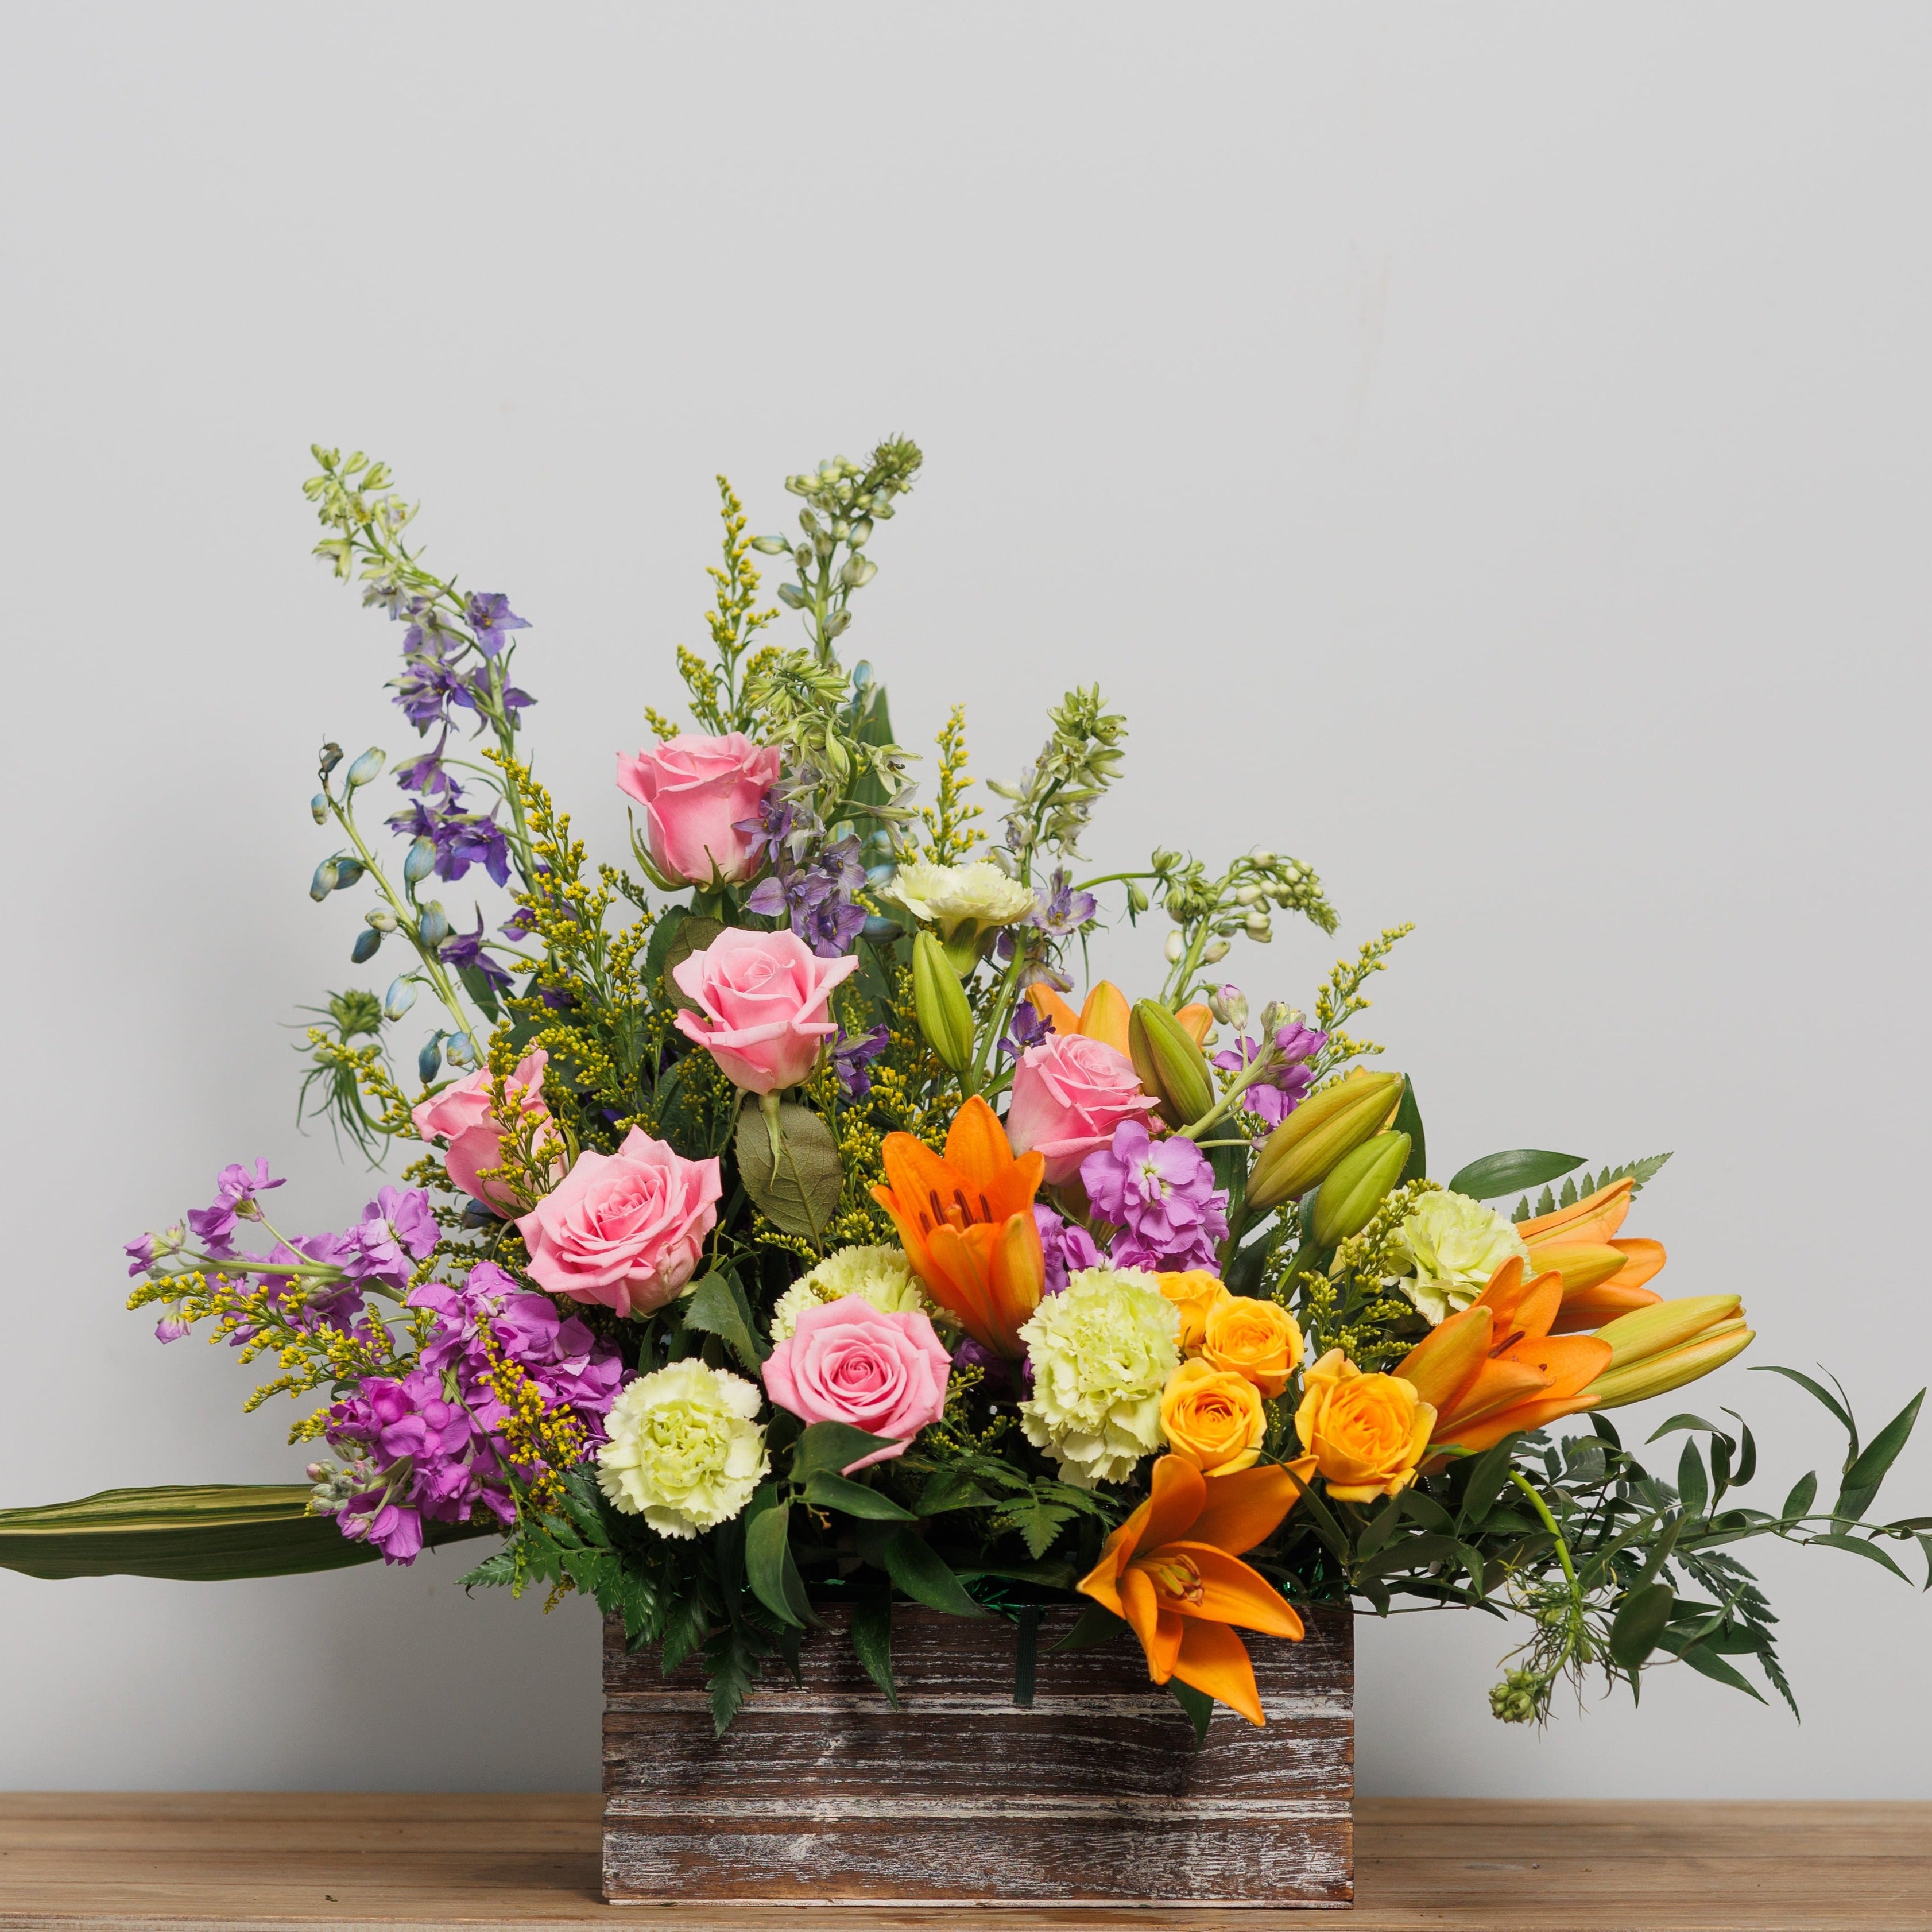 An arrangement with orange lilies, pink lilies and purple stock in a wooden box.